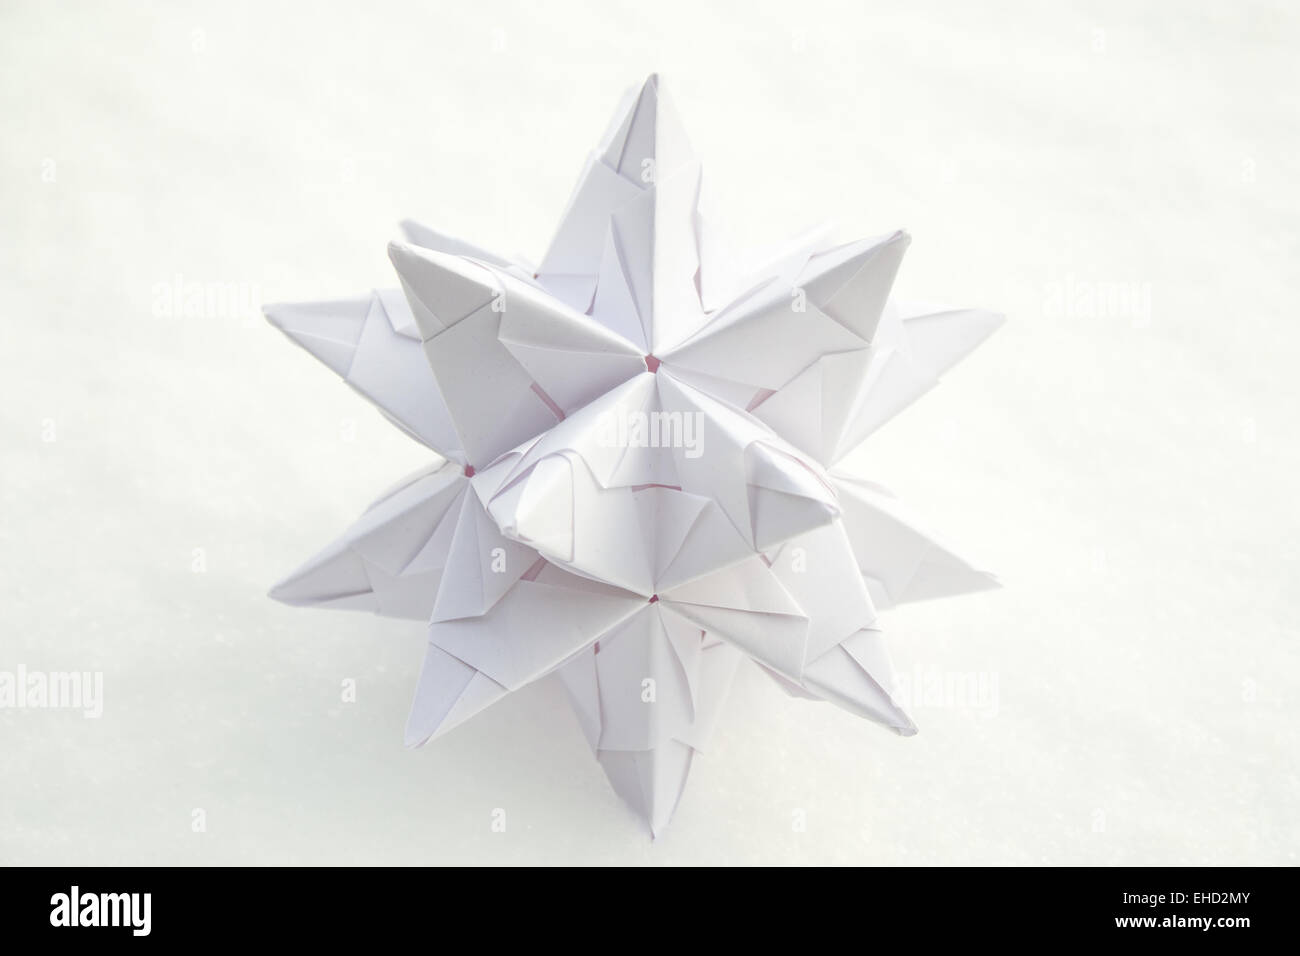 White paper star with snow as background. Stock Photo